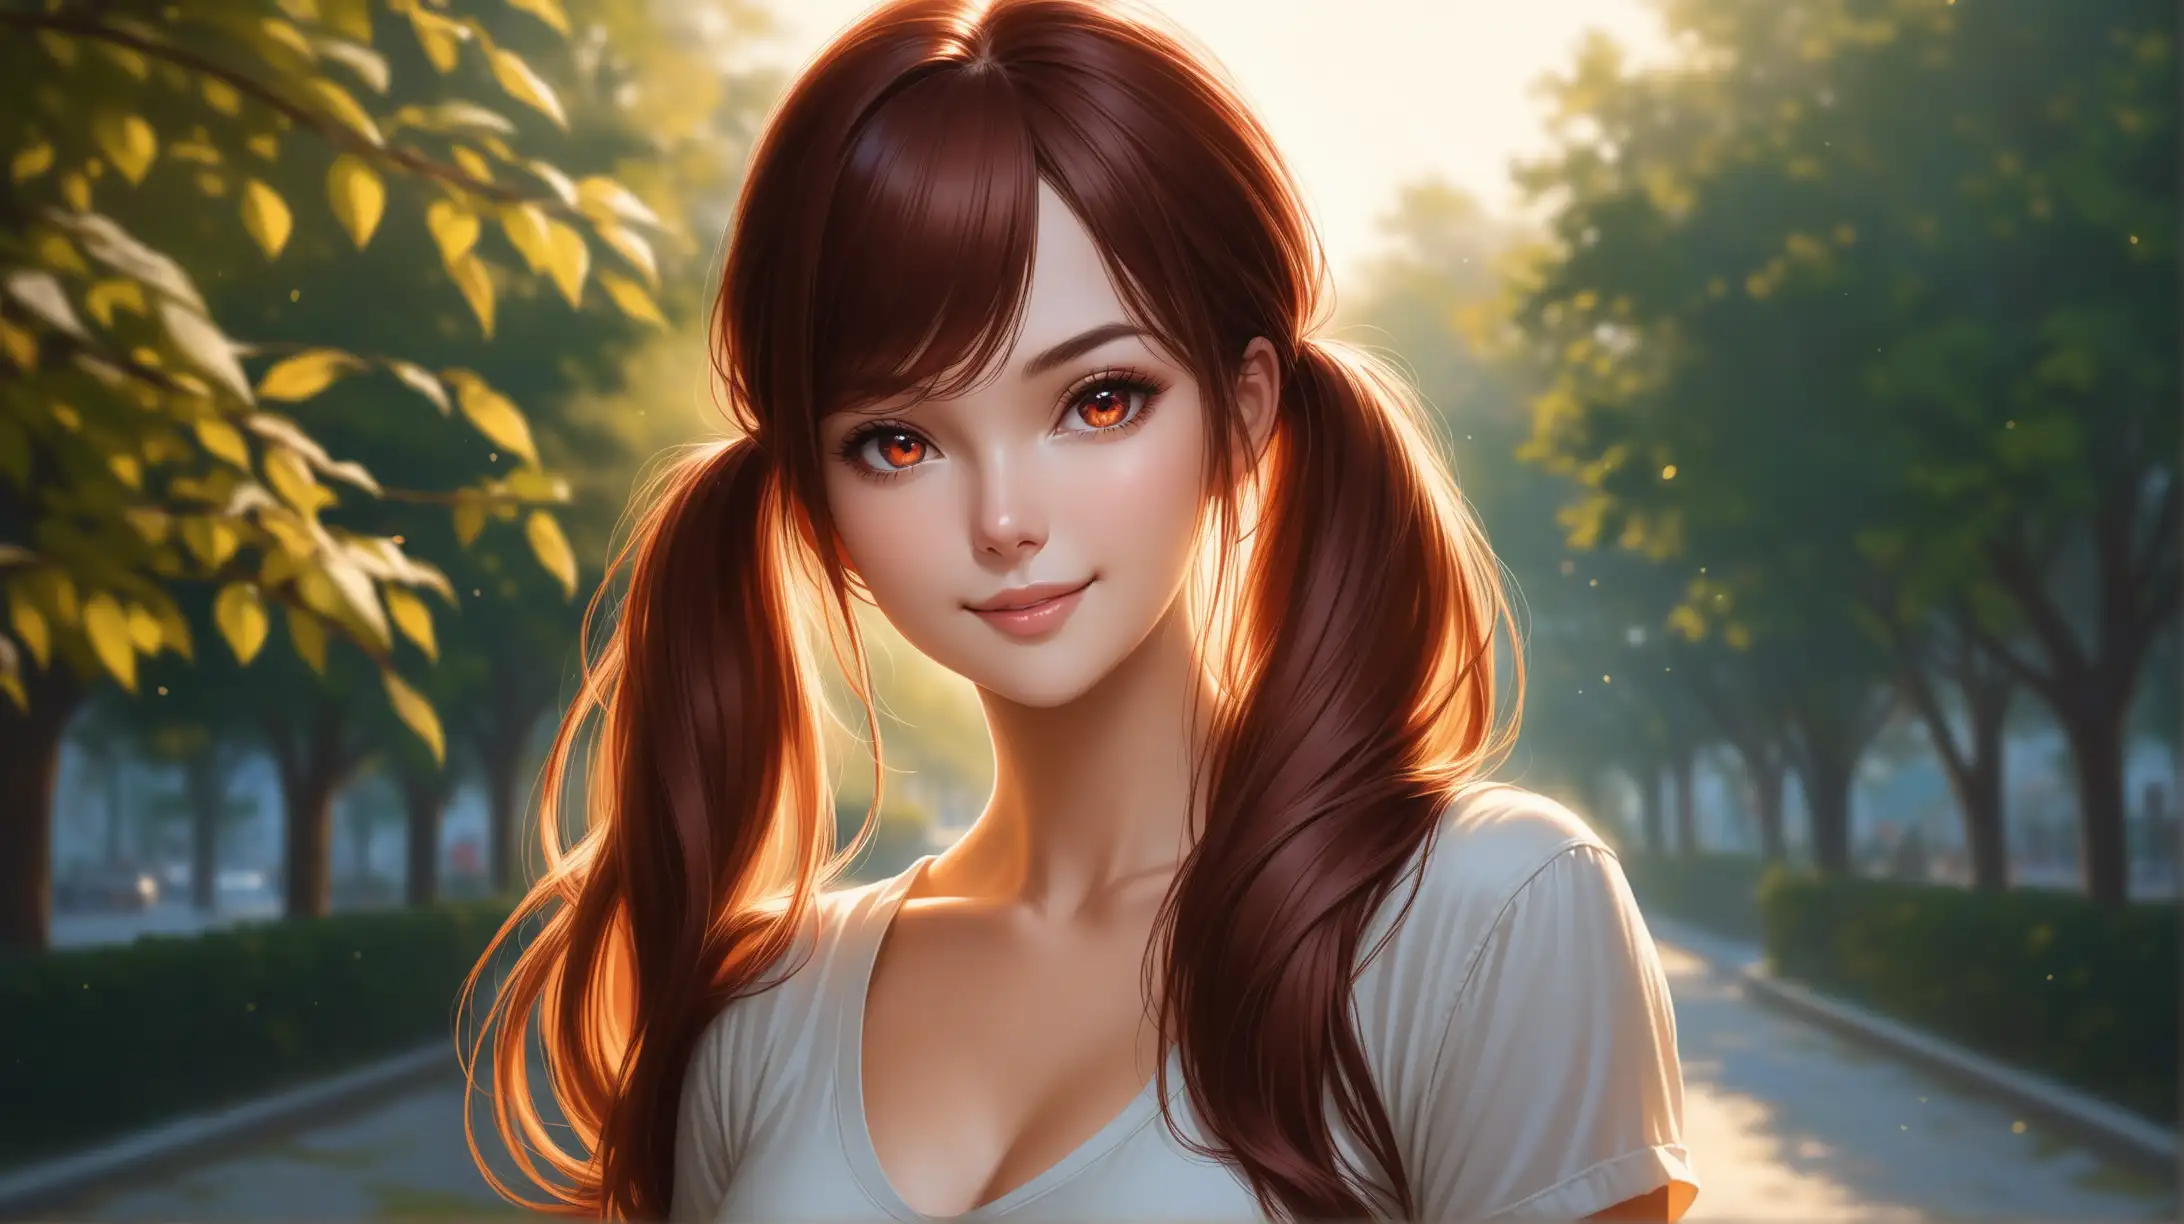 Draw a woman, very long reddish-brown hair, waist-length twintails, side locks, side-swept bangs, scarlet eyes, perky figure, high quality, realistic, accurate, detailed, long shot, ambient lighting, outdoors, seductive pose, casual outfit, smiling at the viewer